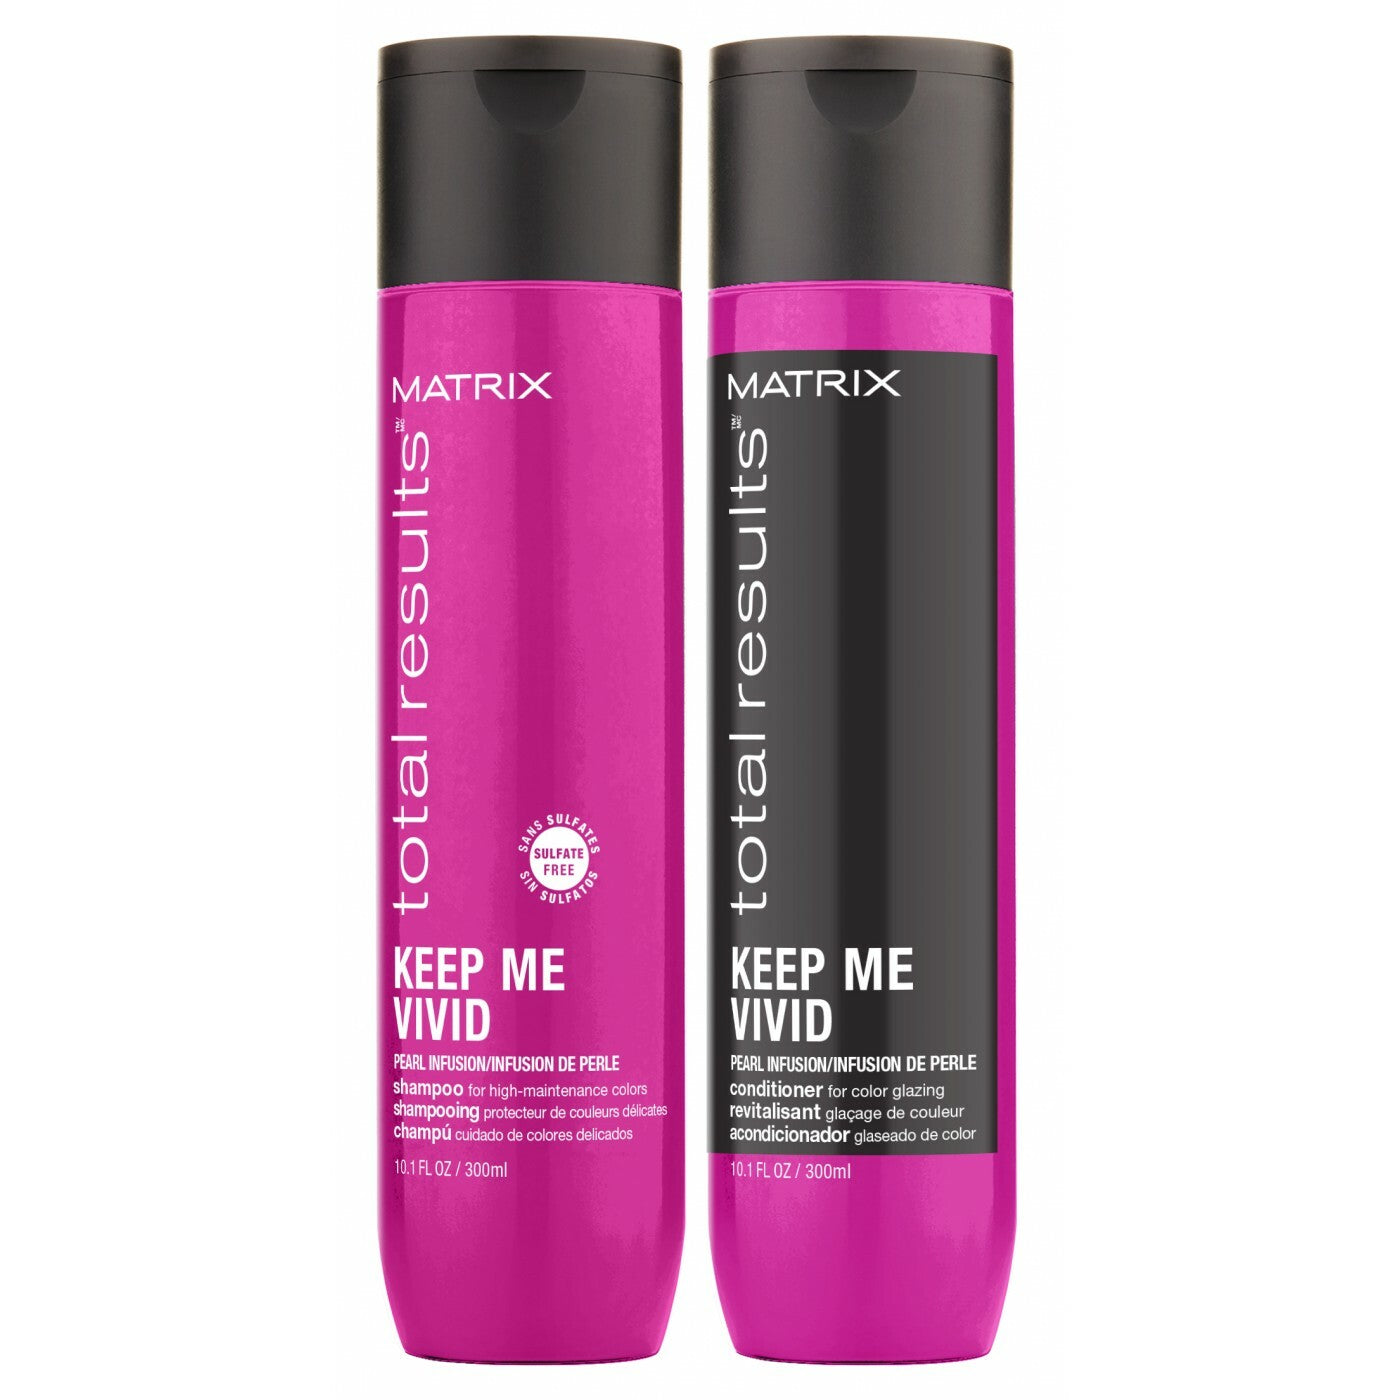 Matrix Keep Me Vivid Shampoo & Conditioner 10.1oz 300ml Set - Hair Products for Maintaining Vibrancy and Increased Shine on Colored Hair